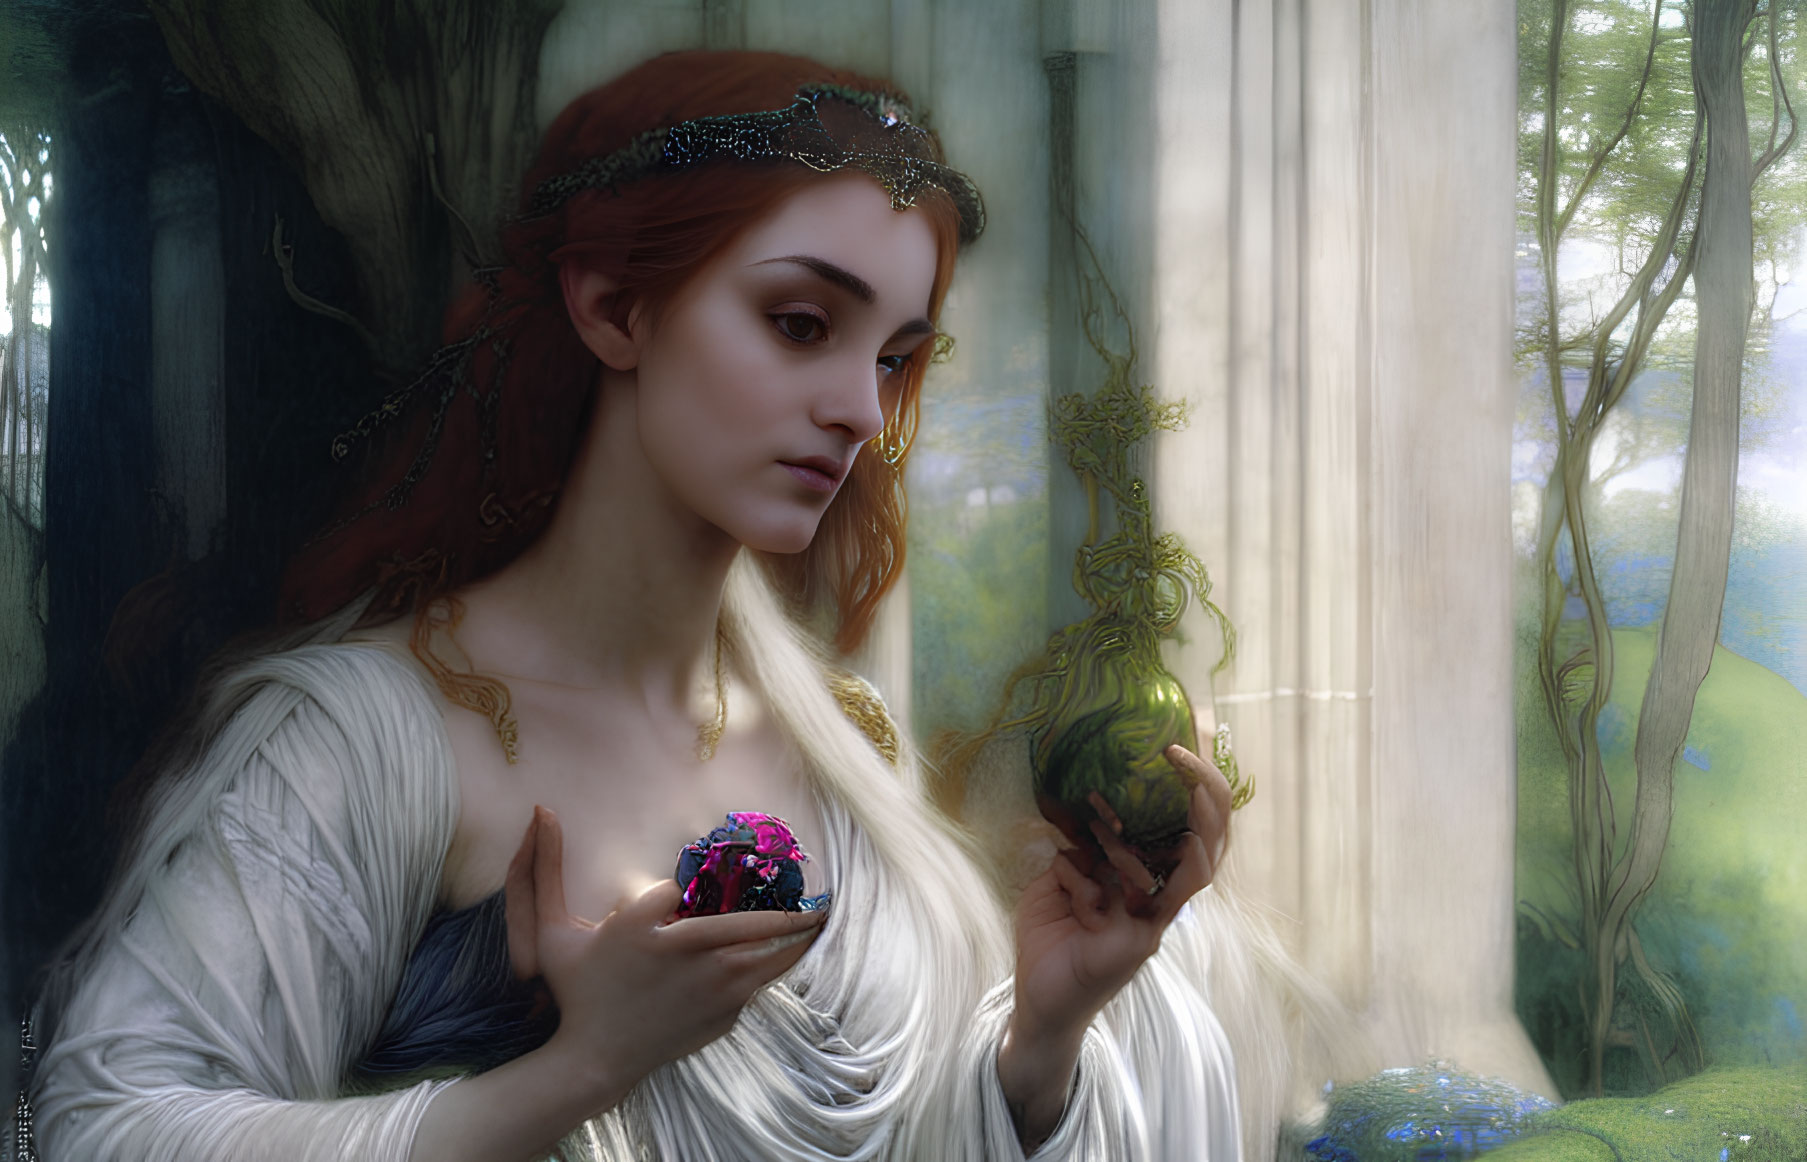 Red-haired elven woman with magical fruit in serene forest setting